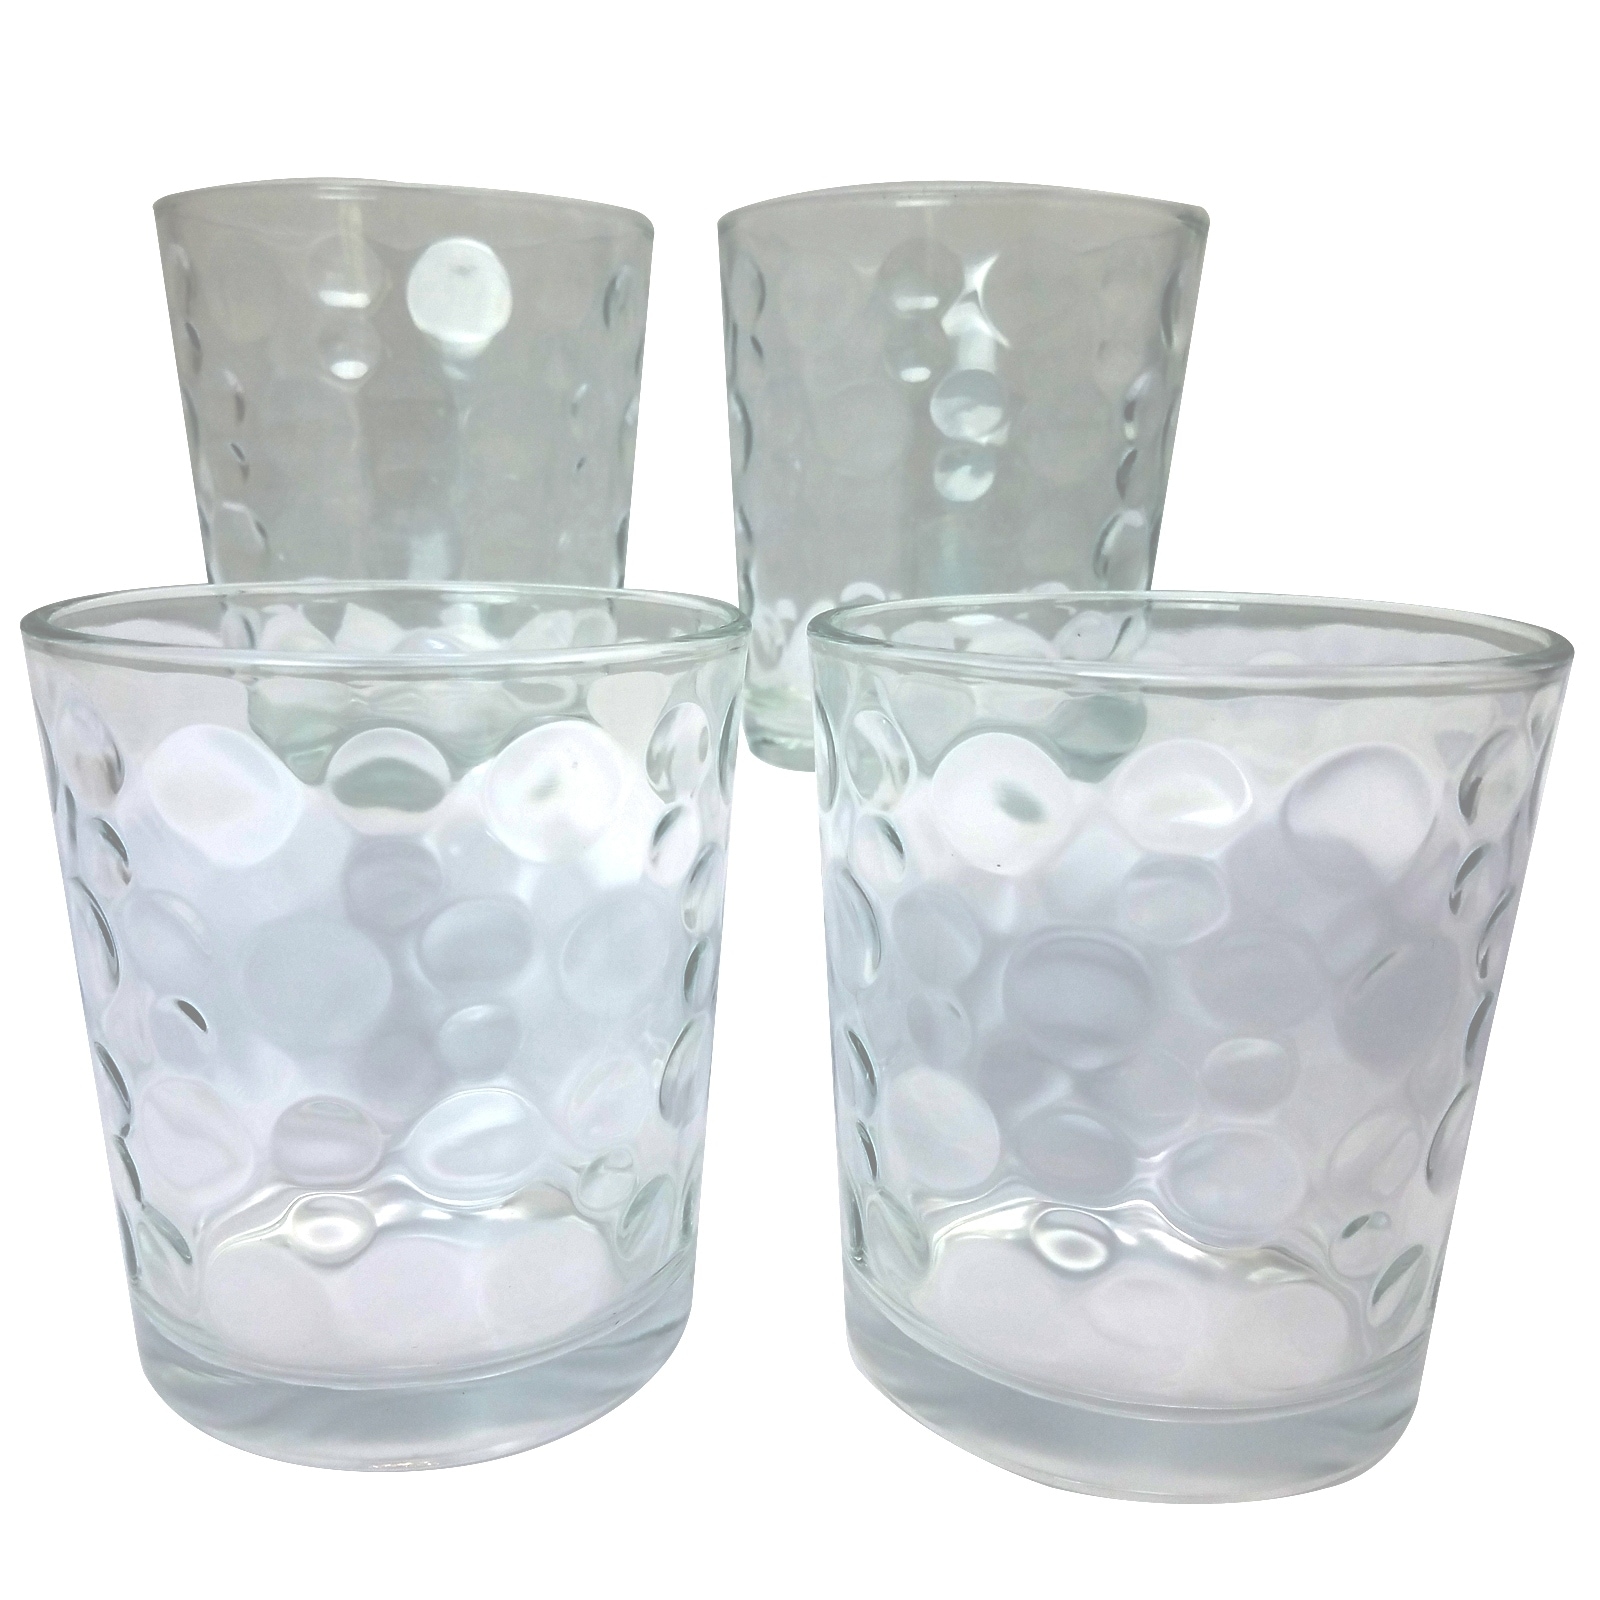 https://ak1.ostkcdn.com/images/products/is/images/direct/b271cba385fe3f7669d0c8d05c23280f28cc7d61/Great-Foundations-4-Piece-13-oz-Clear-Embossed-Glass-Set-with-Bubbles-Pattern.jpg